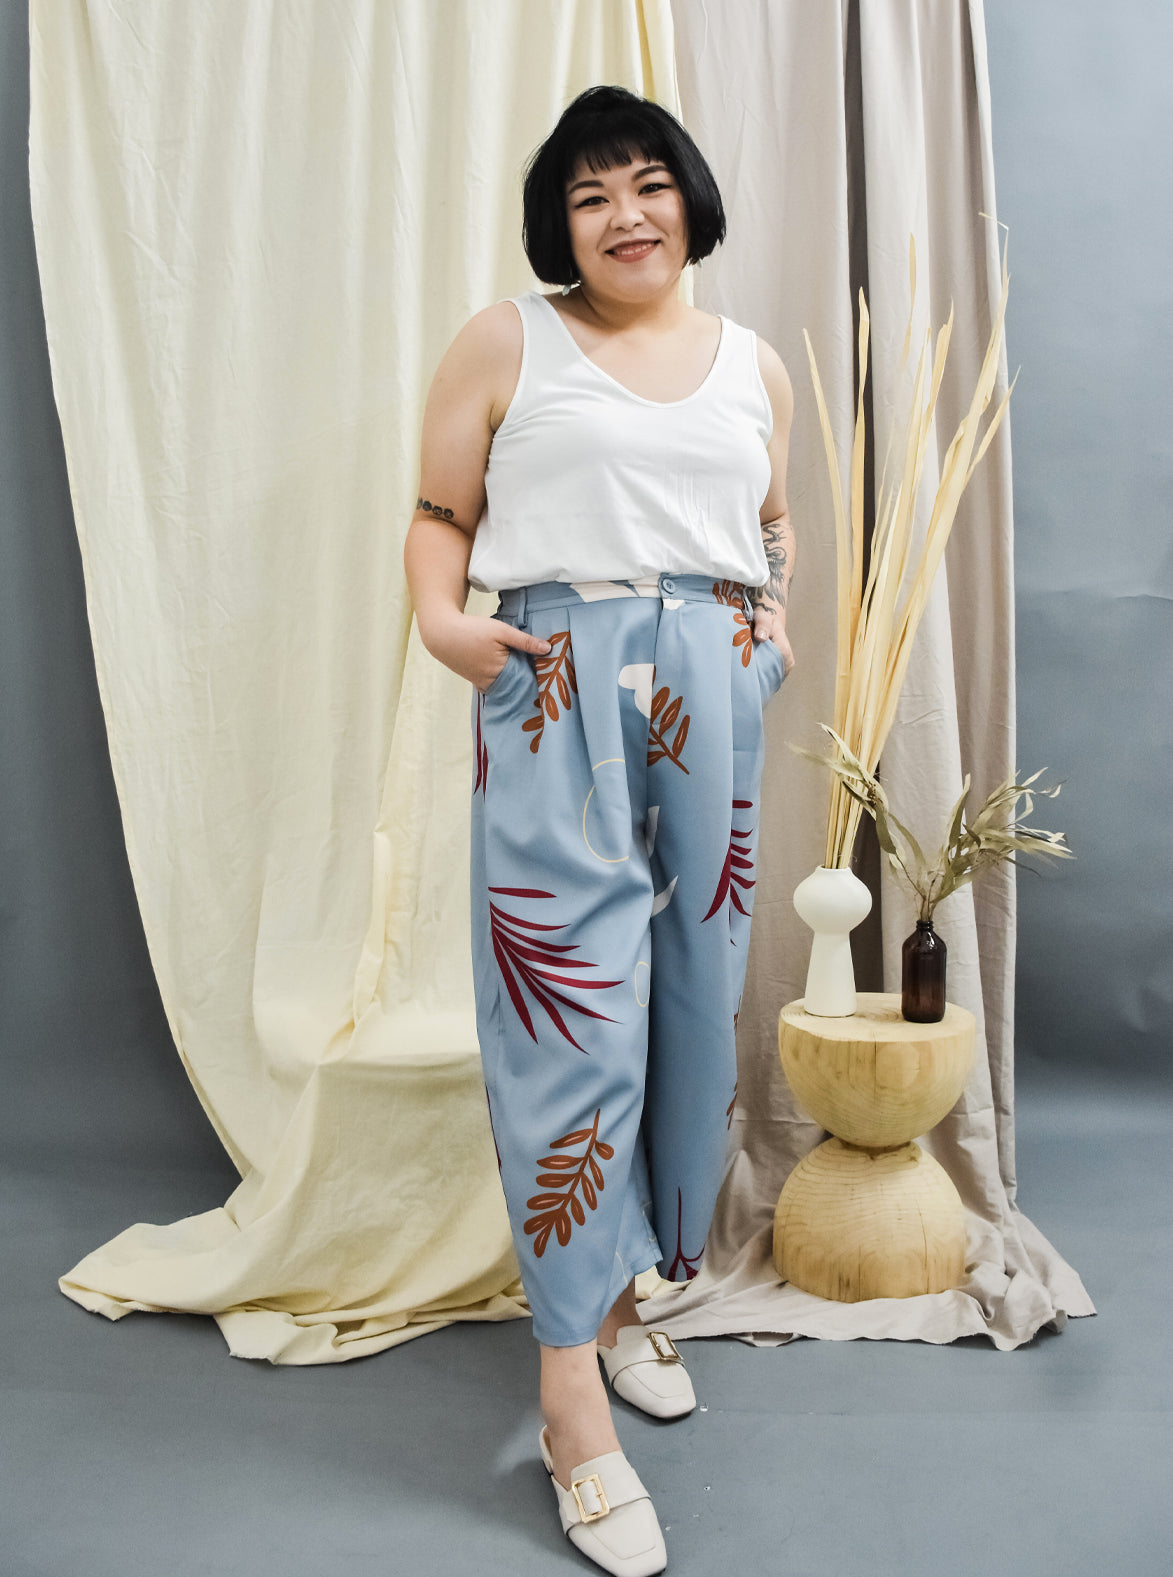 GRWM styling the Kmart geo wide leg pants for an easy but put together  spring look. Save for inspo and follow for more like this 🤩